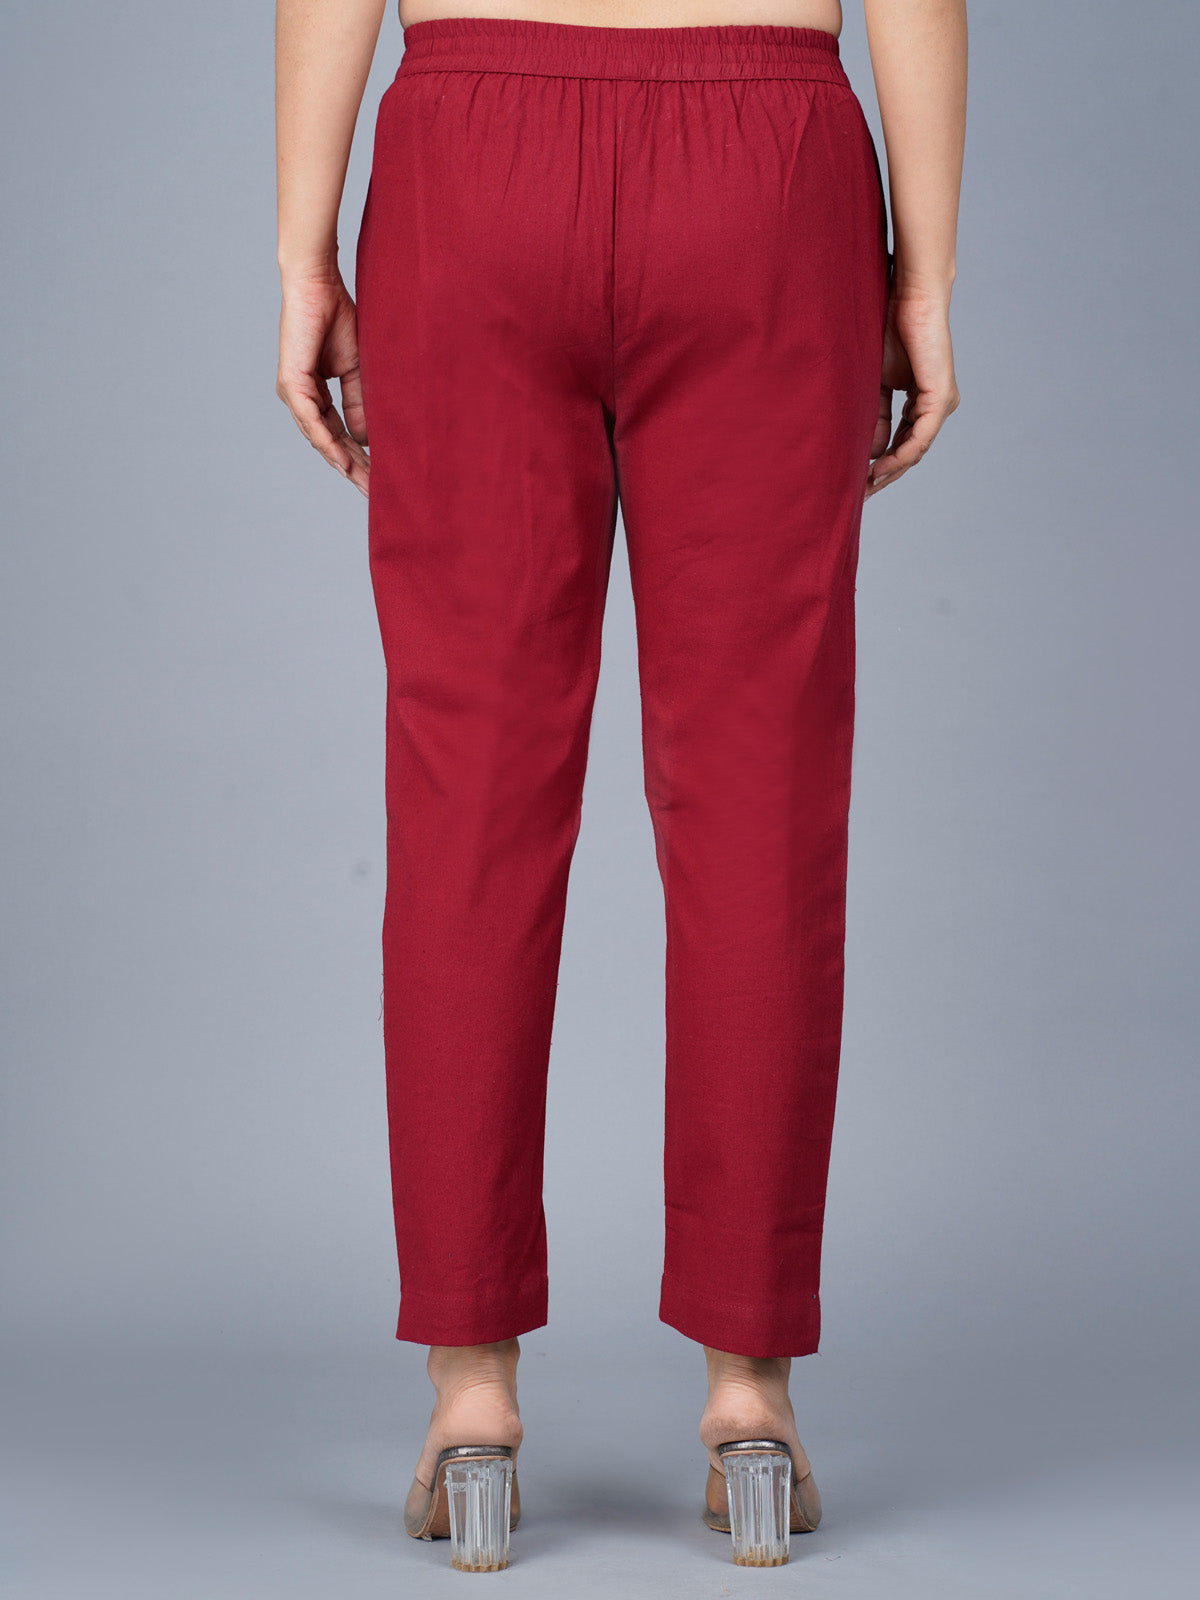 Pack Of 2 Womens Regular Fit Cream And Maroon Fully Elastic Waistband Cotton Trouser